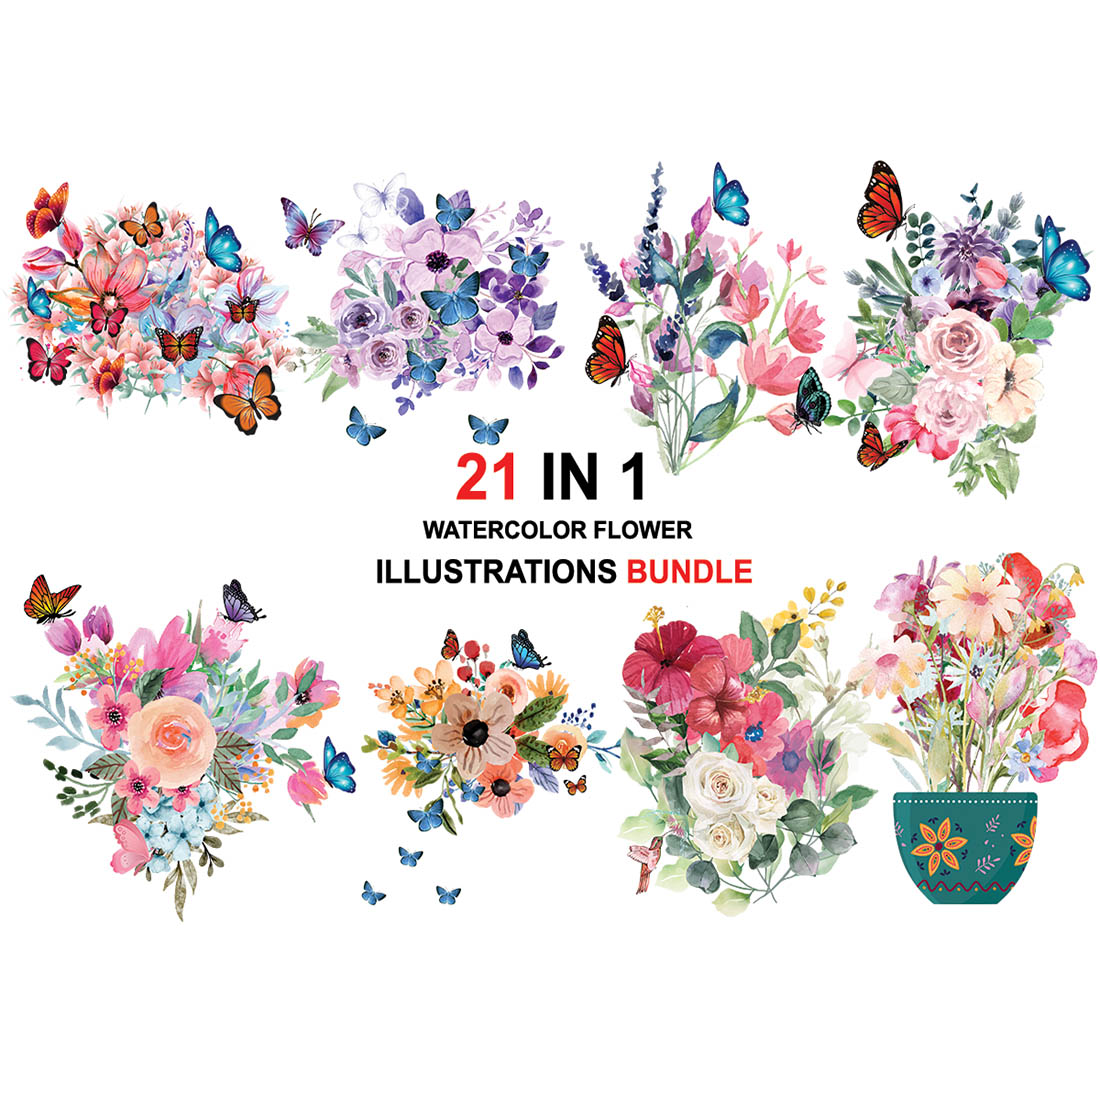 Watercolor Flower Illustrations ain cover.